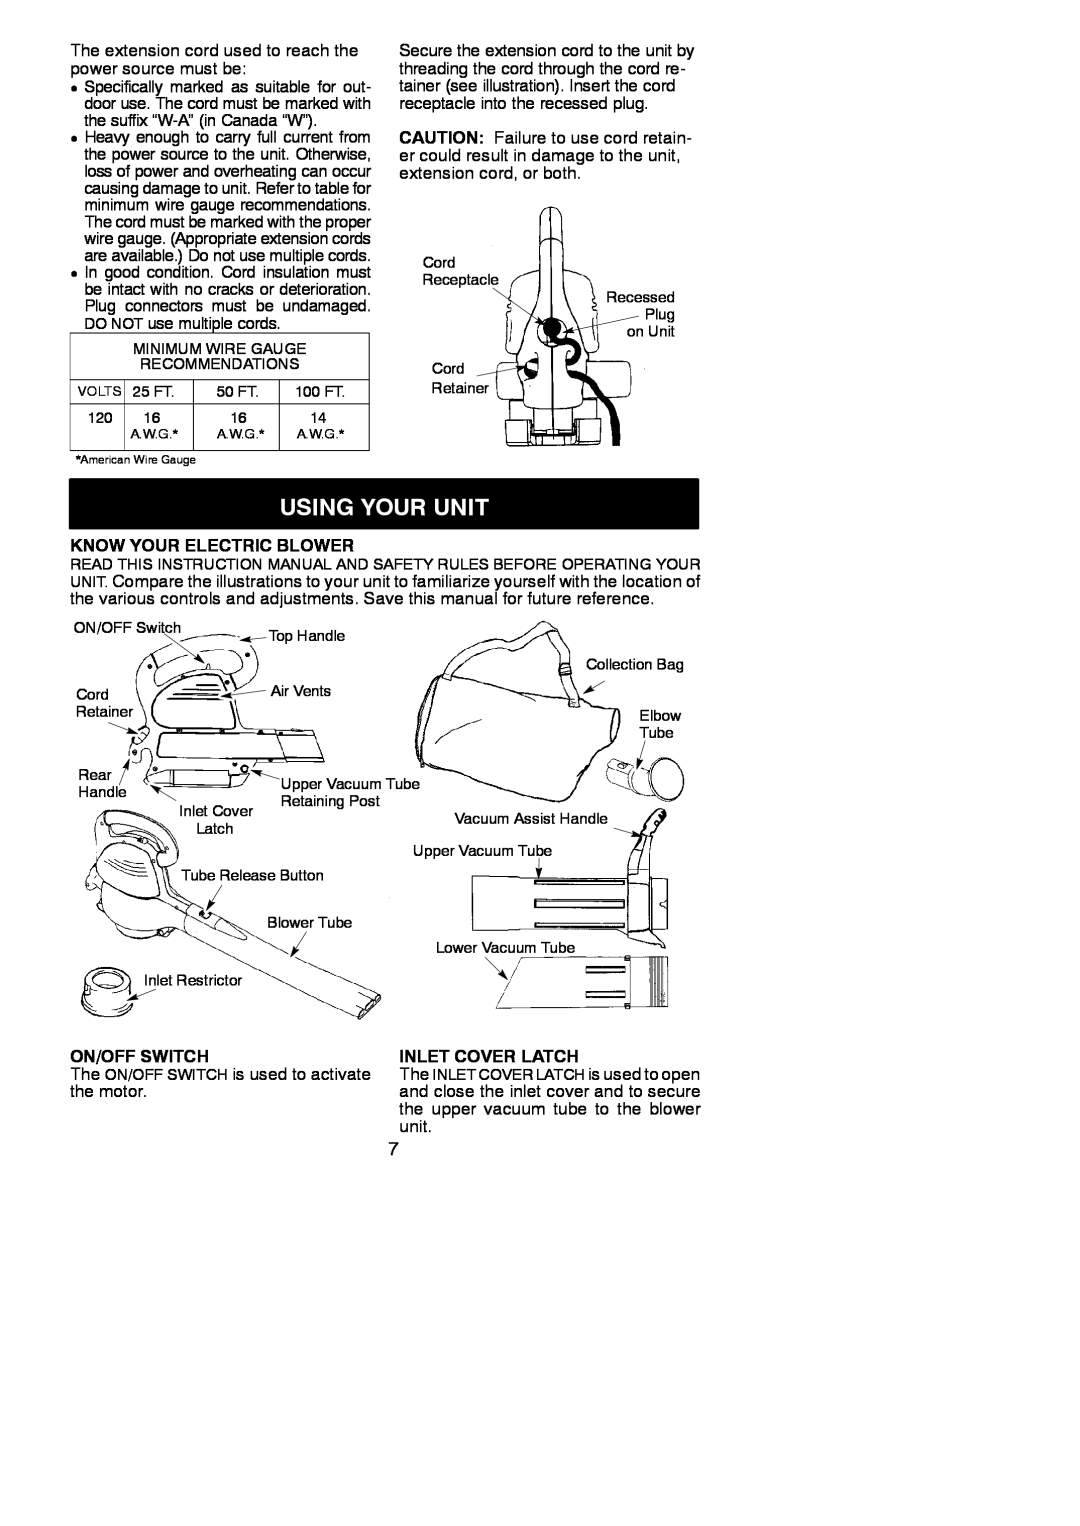 Poulan EBV 215 instruction manual Using Your Unit, Know Your Electric Blower, On/Off Switch, Inlet Cover Latch 